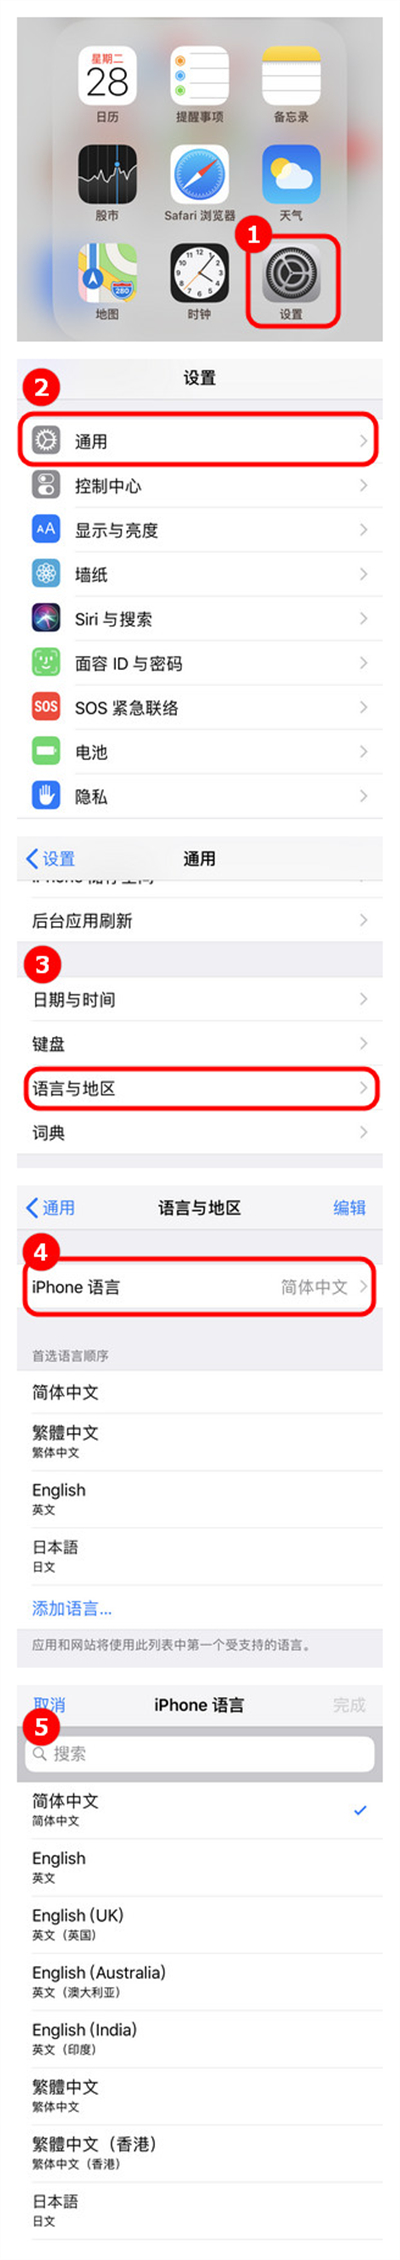 Redfinger cloud mobile phone ios switch language guide，ro